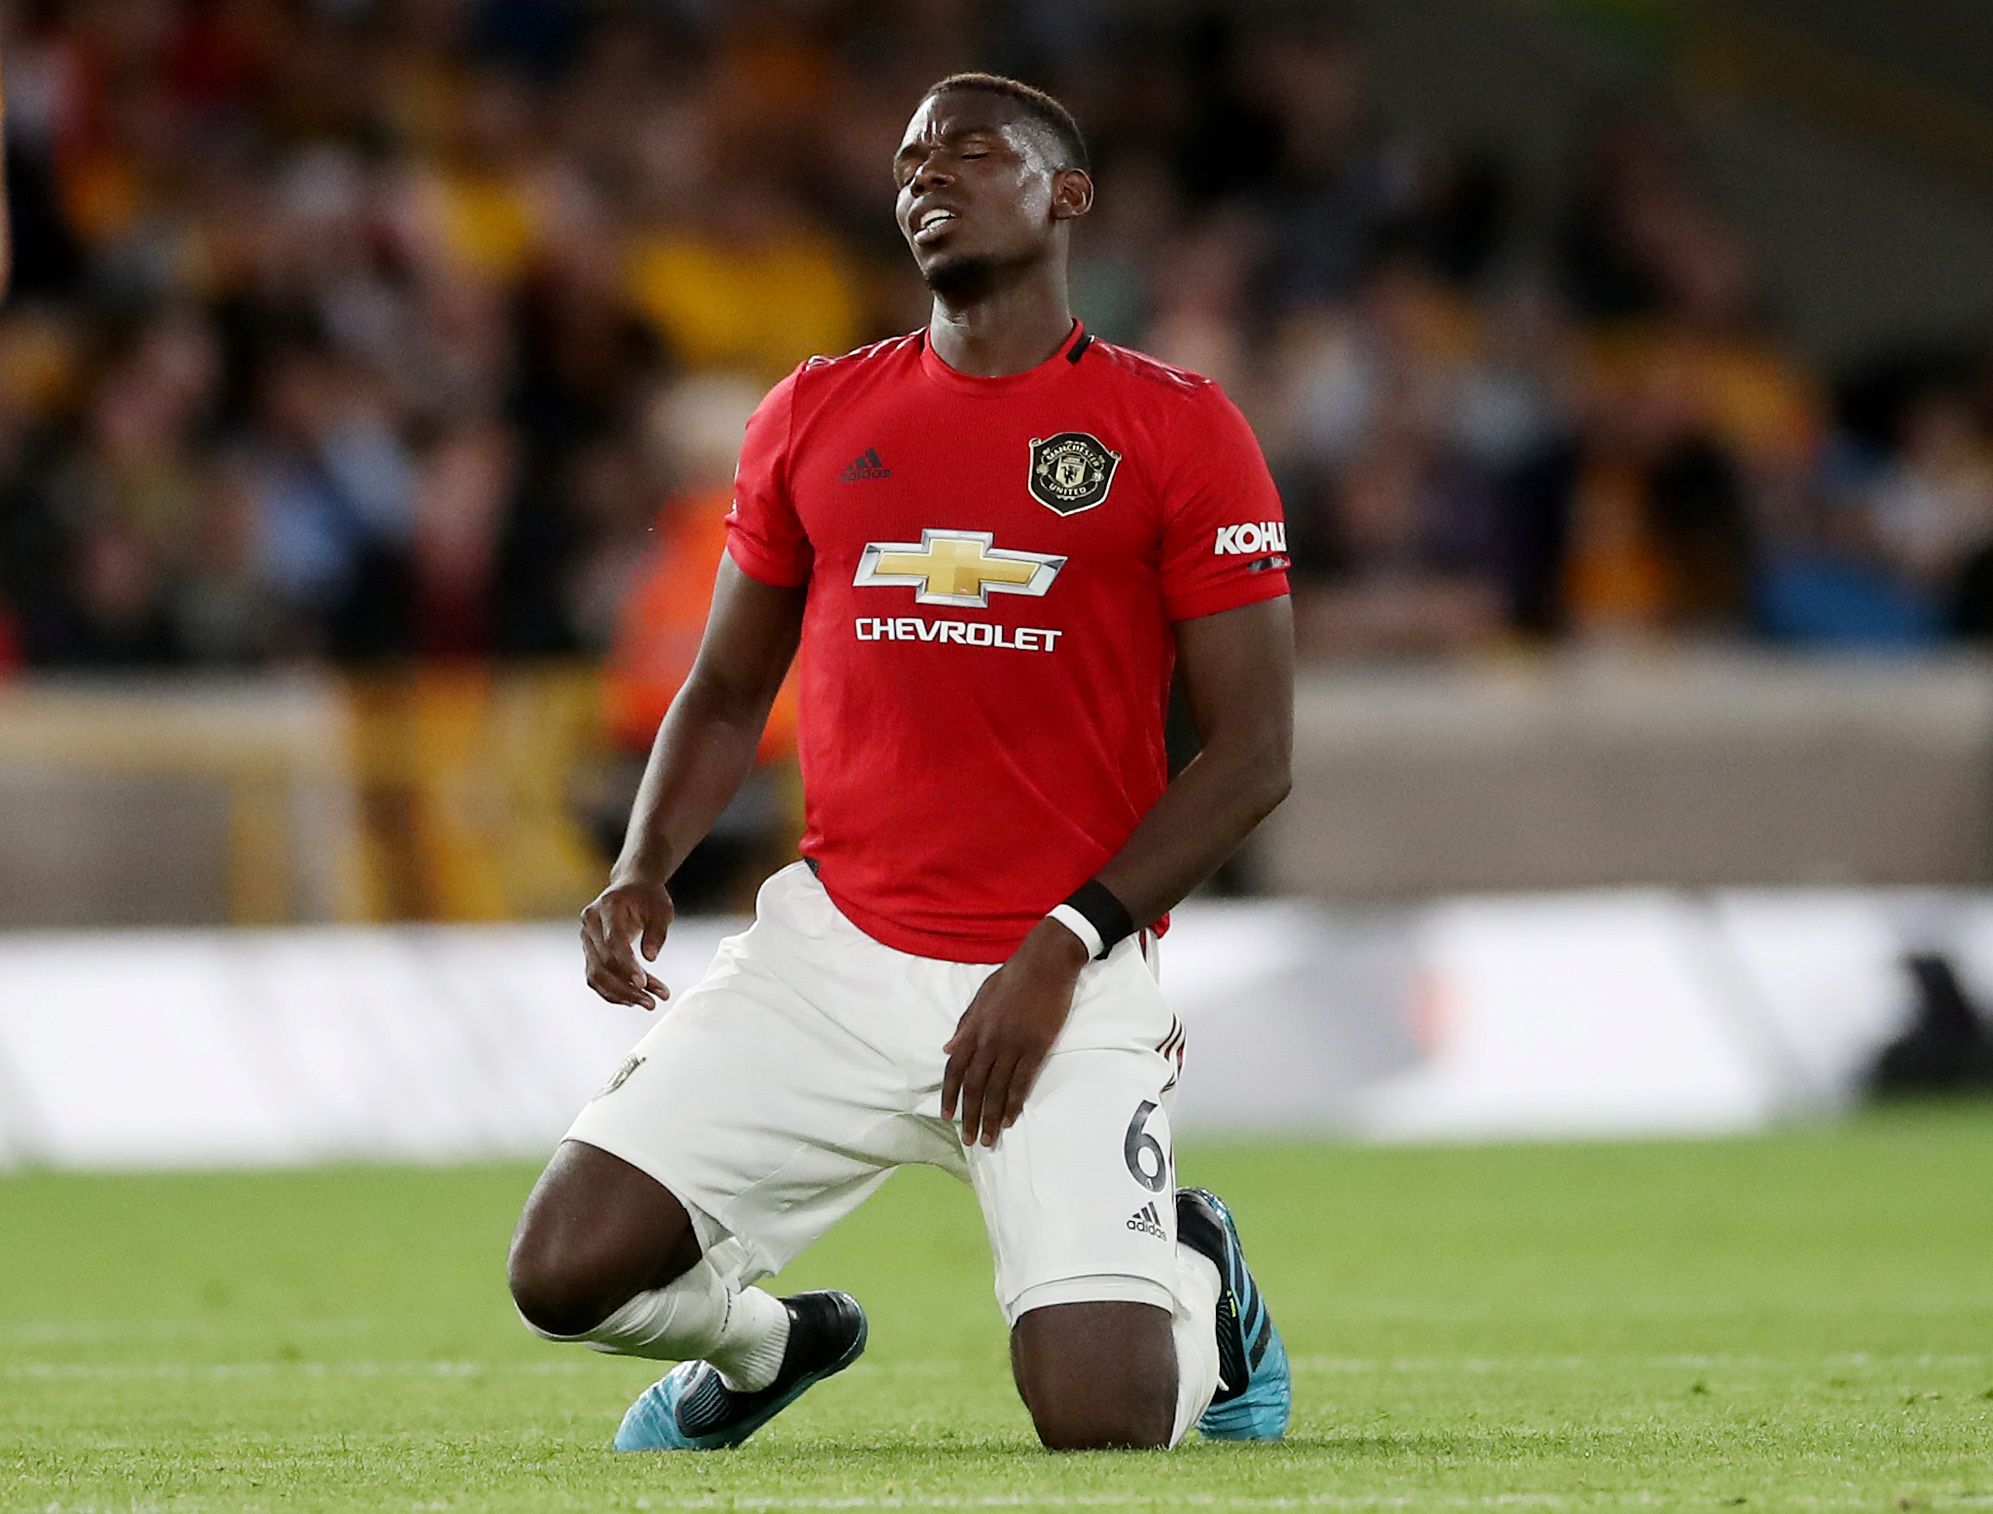 Soccer Football - Premier League - Wolverhampton Wanderers v Manchester United - Molineux Stadium, Wolverhampton, Britain - August 19, 2019   Manchester United's Paul Pogba reacts   Action Images via Reuters/Carl Recine    EDITORIAL USE ONLY. No use with unauthorized audio, video, data, fixture lists, club/league logos or 